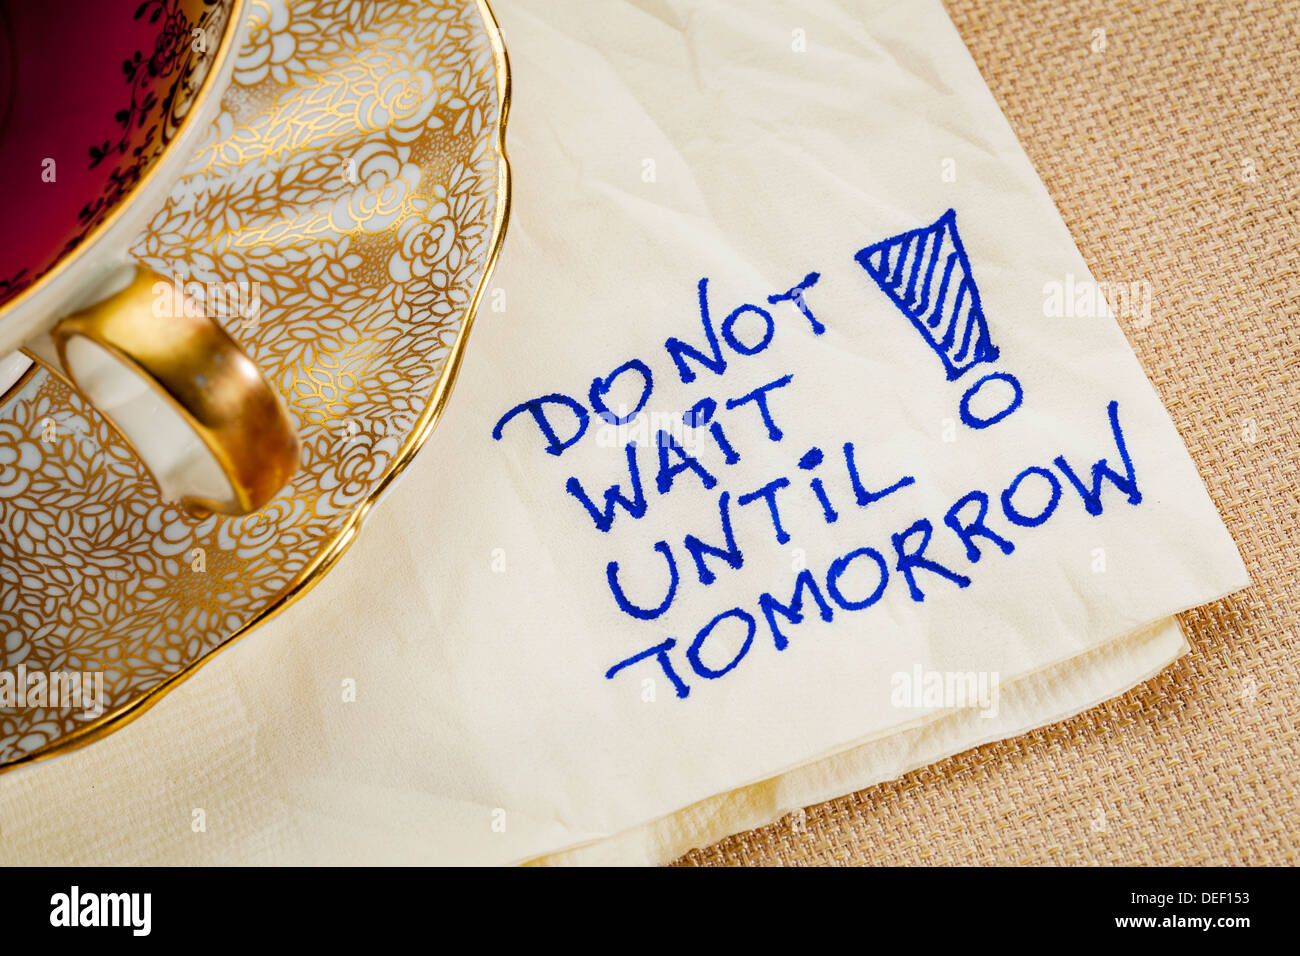 do not wait until tomorrow - motivational reminder - a napkin doodle with a cup of tea Stock Photo